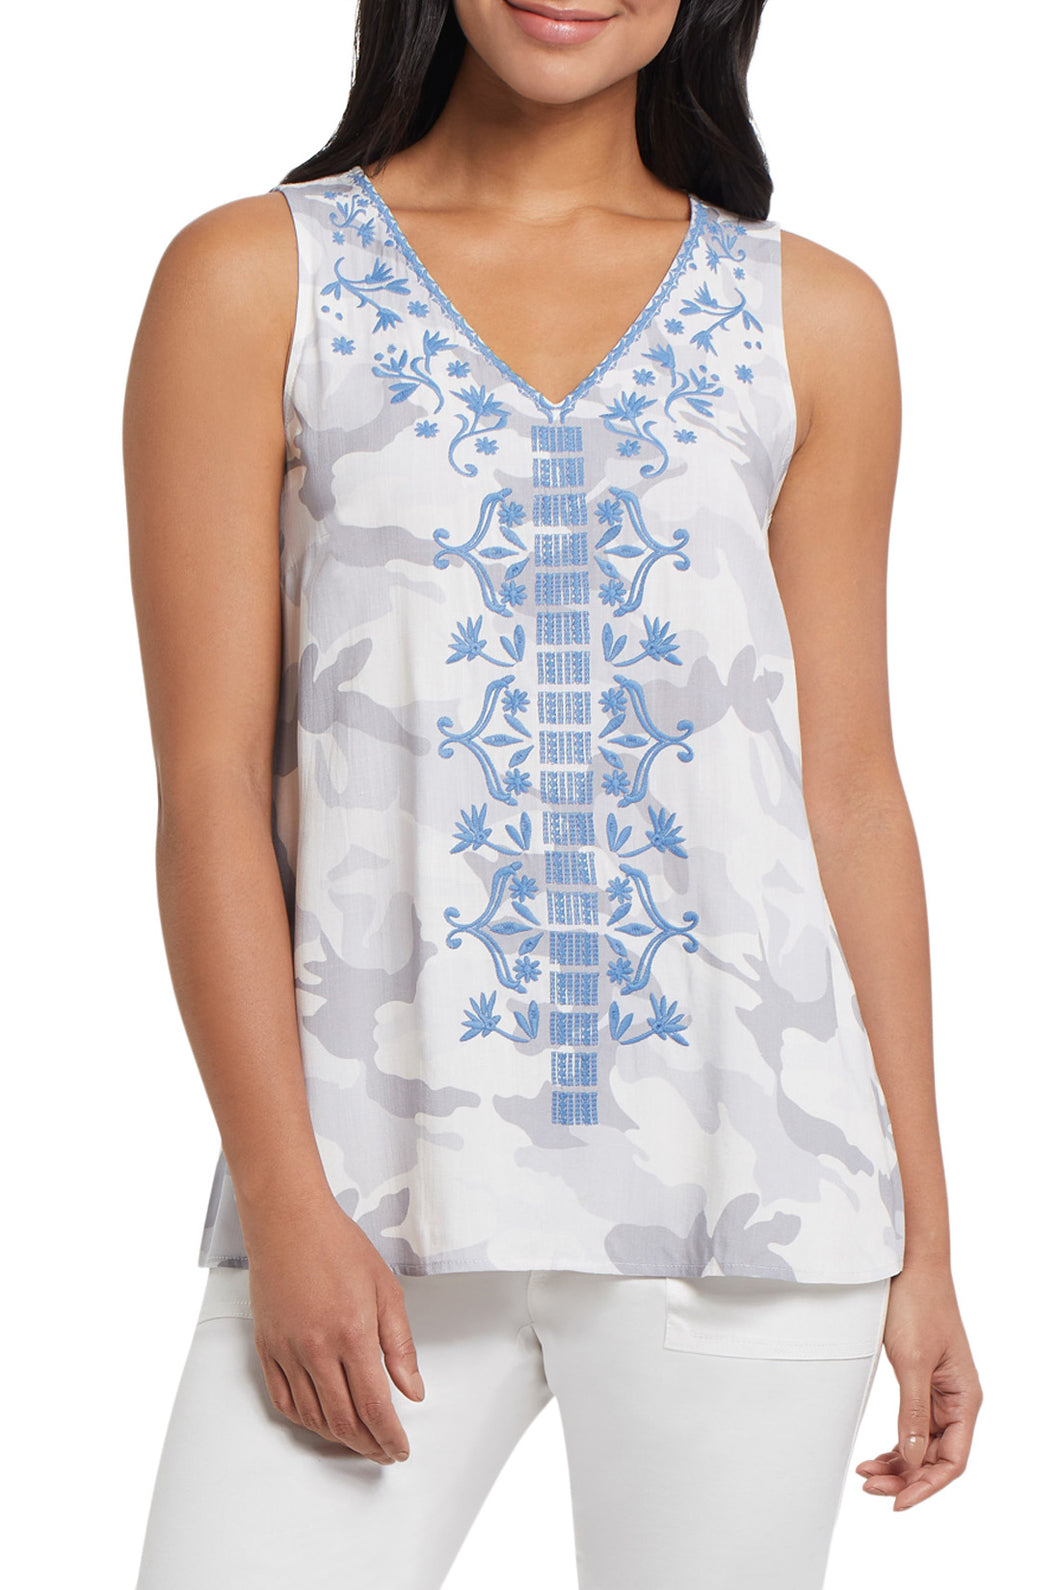  perfect top to transition into the seasons, this sleeveless top in white with gray abstract print is enhanced with a gorgeous, raised embroidery around the neckline and front.  Wear alone during the warmer days and put under a jacket or cardigan as it gets cooler.  A lovely style to wear with white bottoms or denim.  Color- White, gray and blue.  Sleeveless. Embroidery.